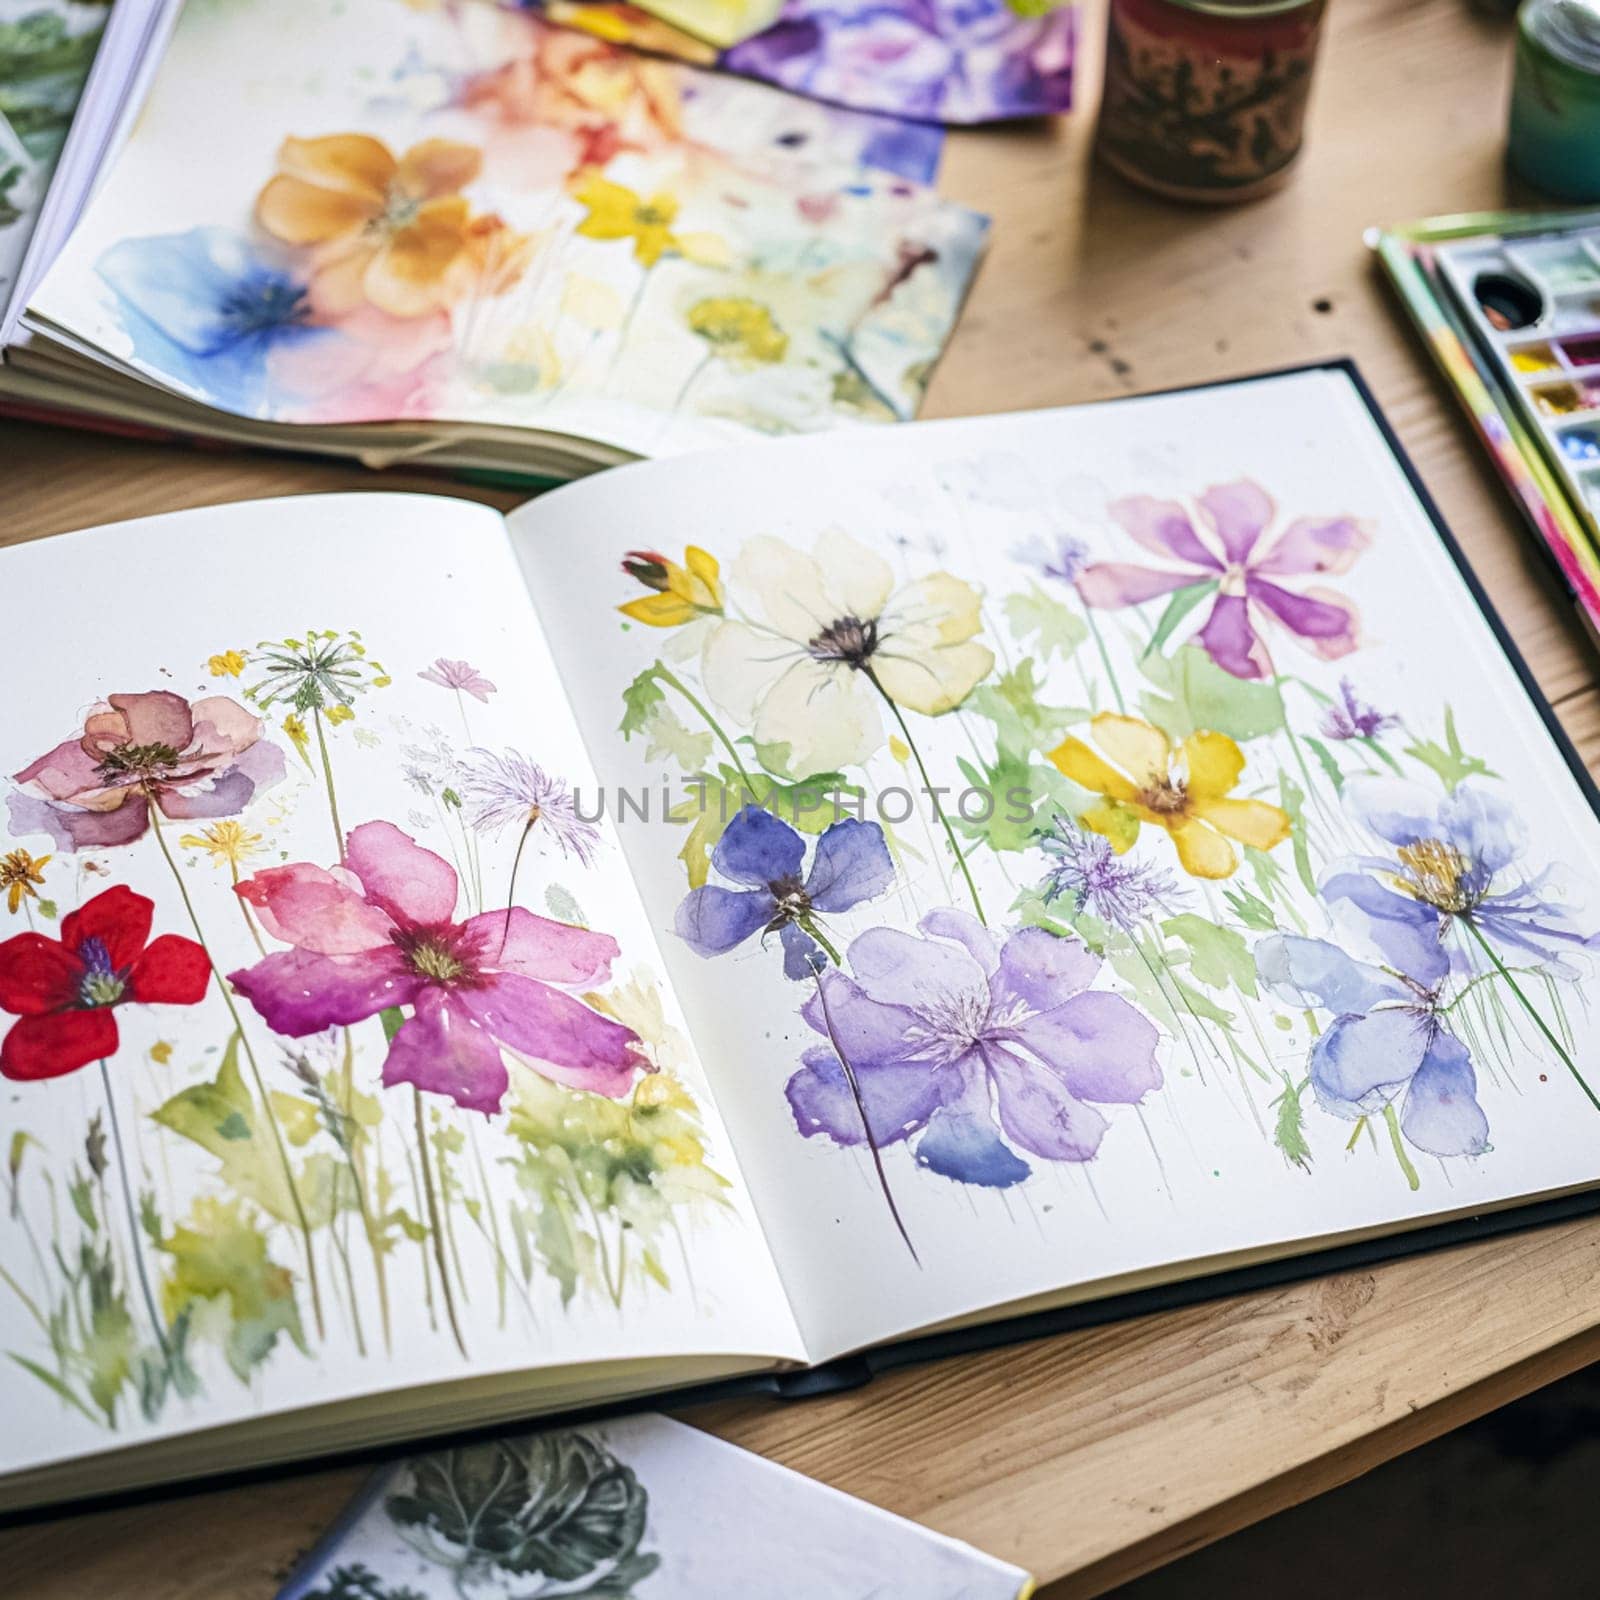 Watercolour painting of wildflowers in a sketchbook, surrounded by an array of watercolour paints and brushes on a wooden table, hobby and craft idea